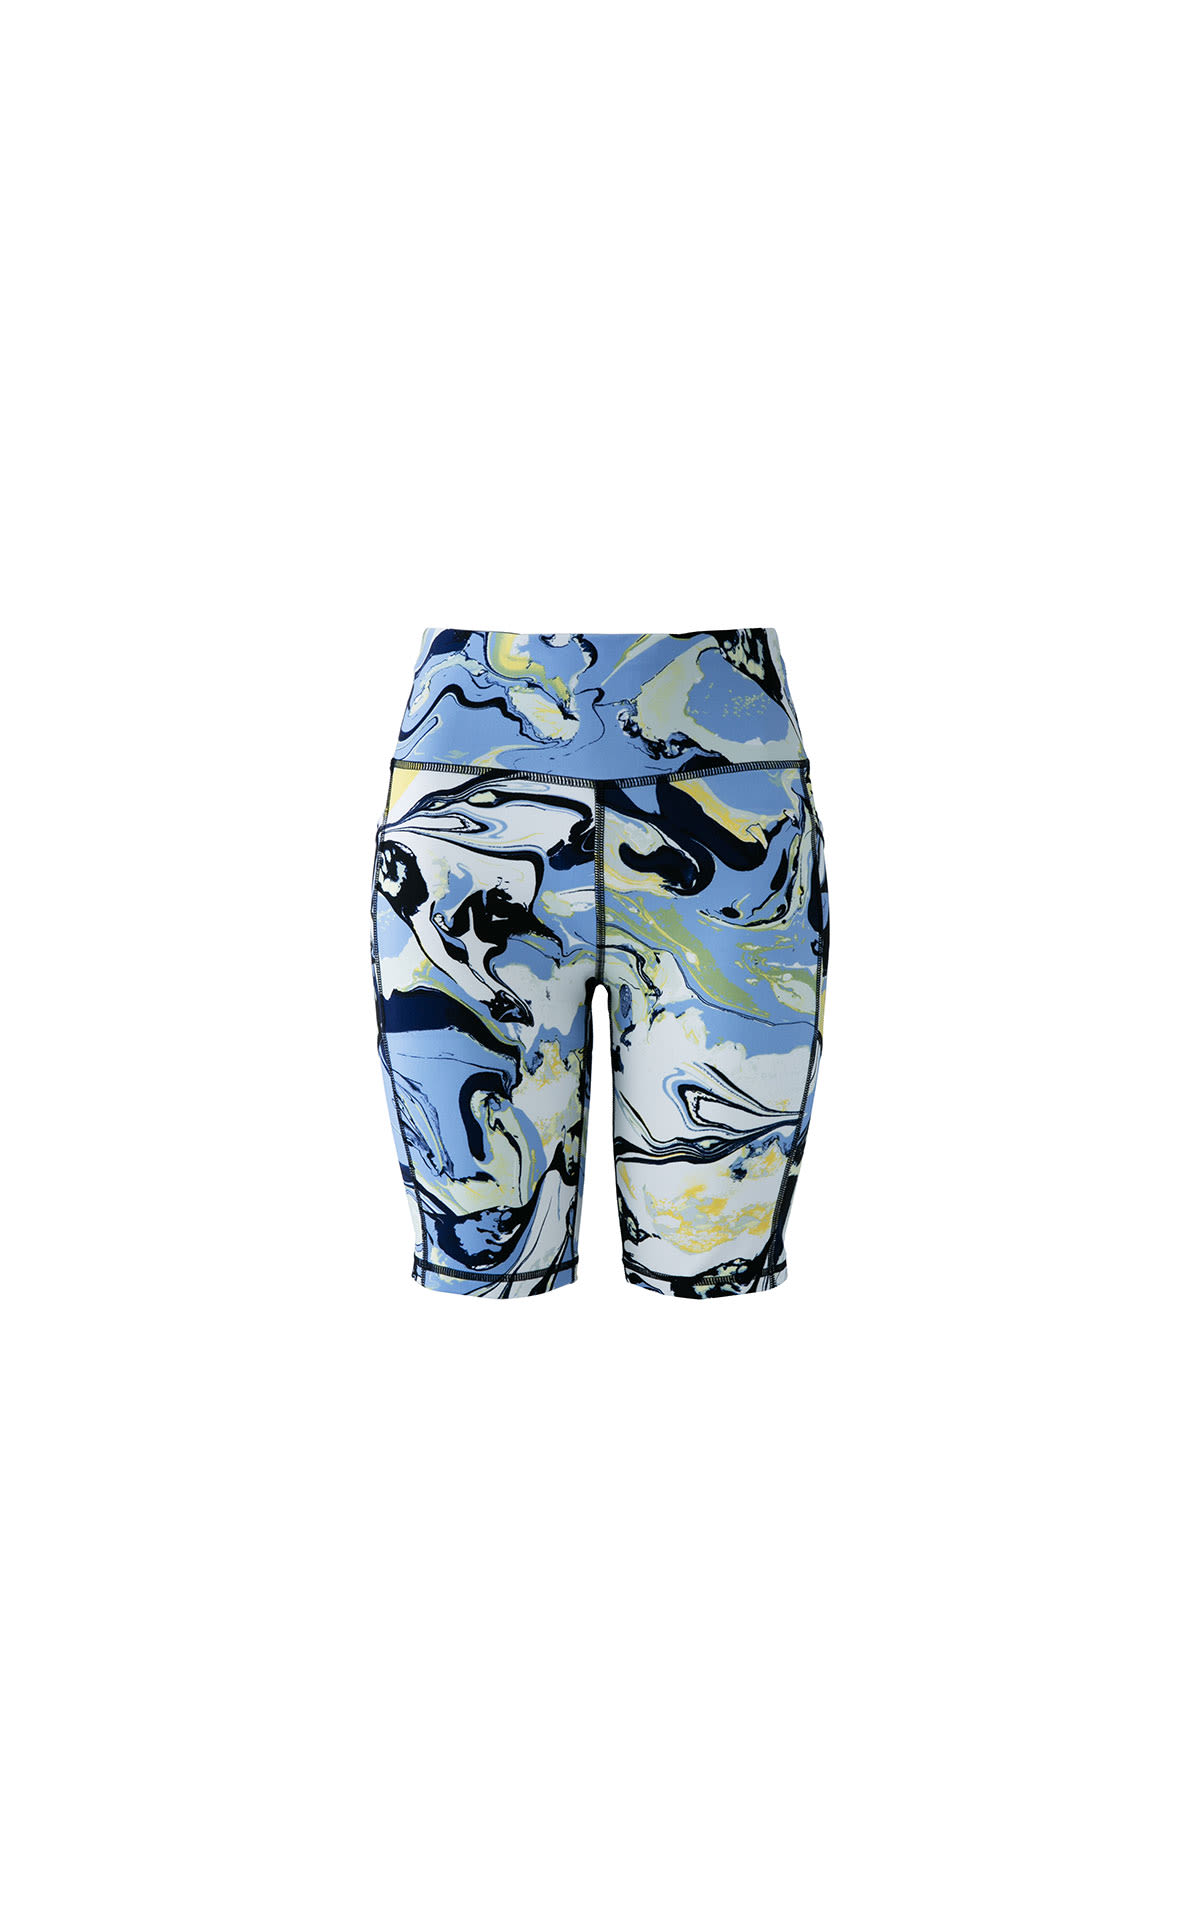 DKNY Printed high waisted bike short from Bicester Village